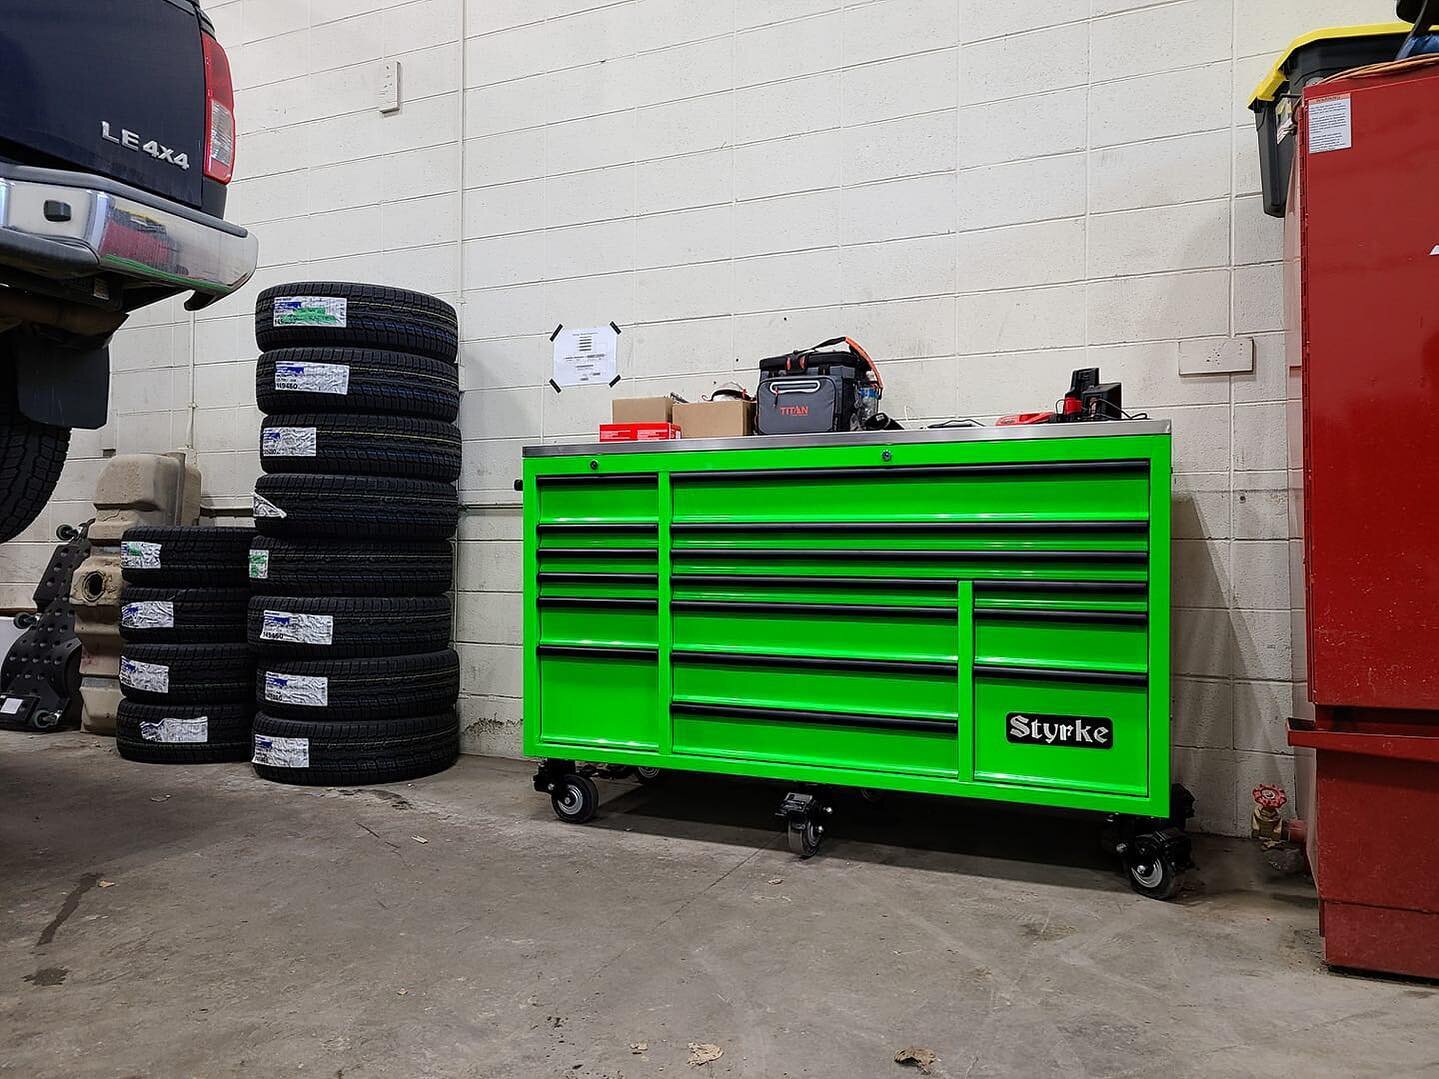 This guy was the most requested box last week! Lime green will be back in stock very soon...👀
&bull;
&bull;
&bull;
#limegreen #lime #toolbox #toolcart #toolchest #toolstorage #stainlesssteel #anodizedaluminum #heavyduty #mechanic #heavyequipment #ag